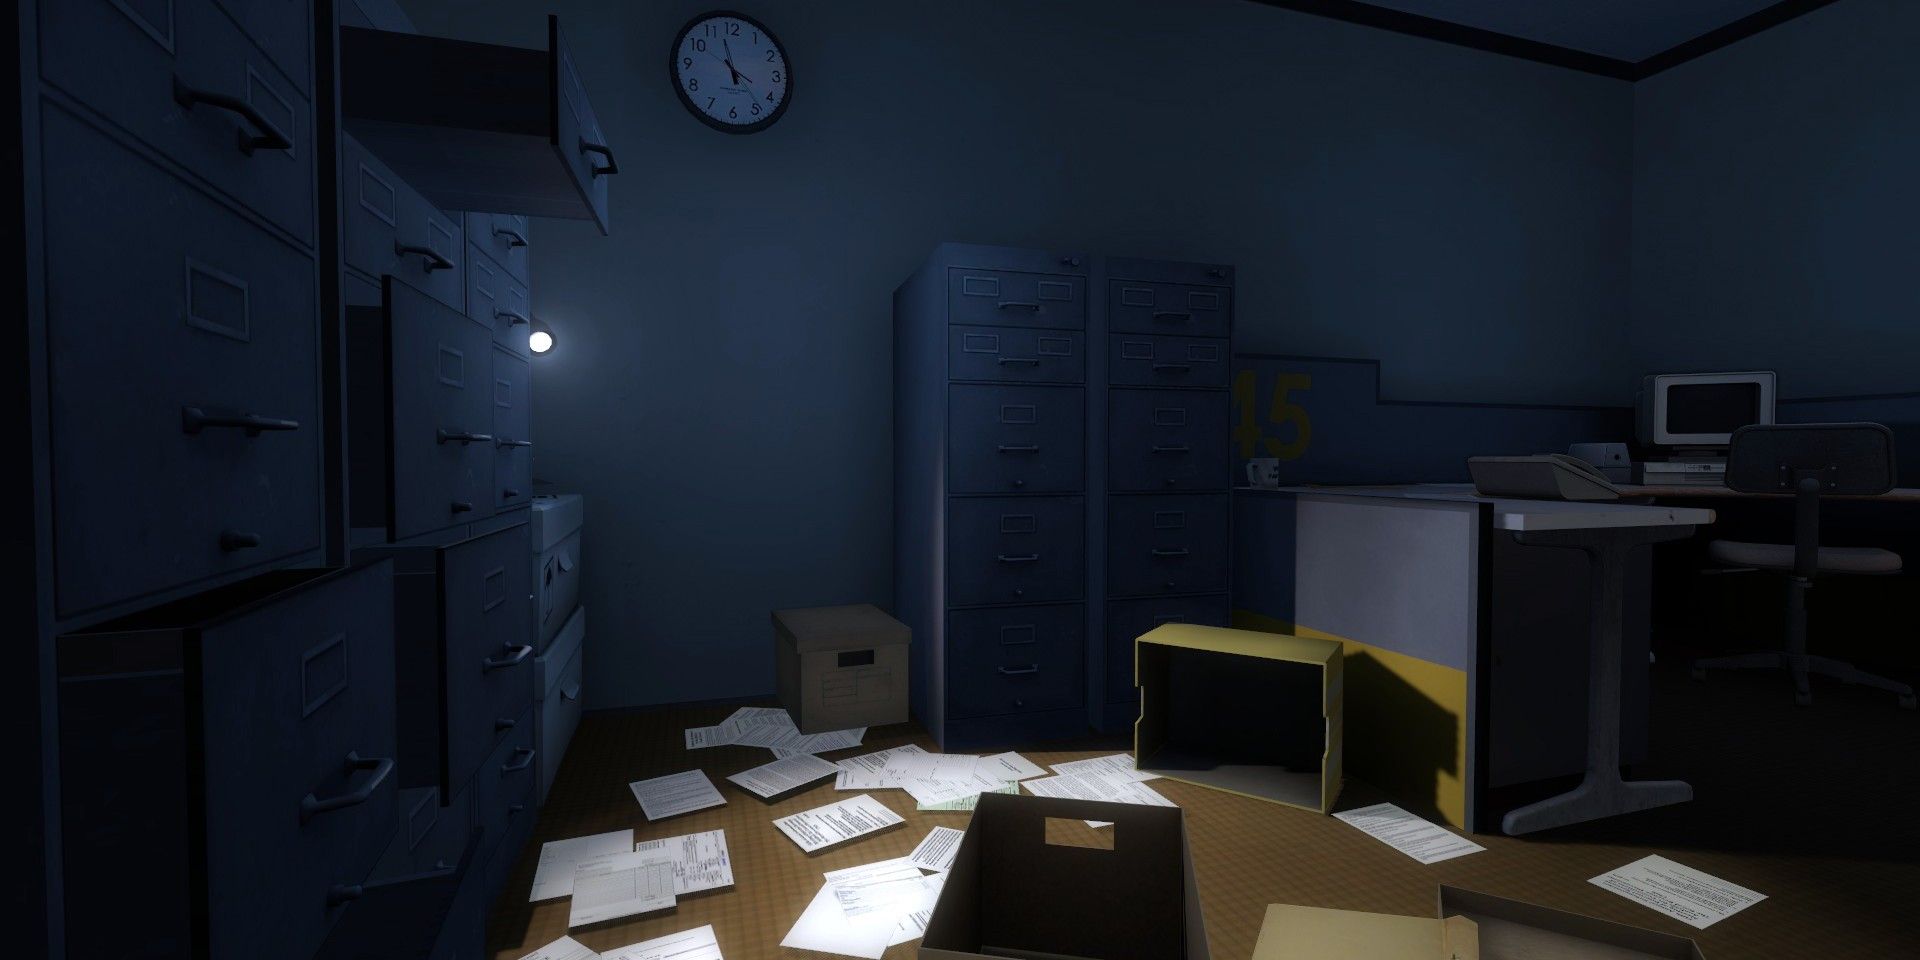 Stanley Parable Keypad Code